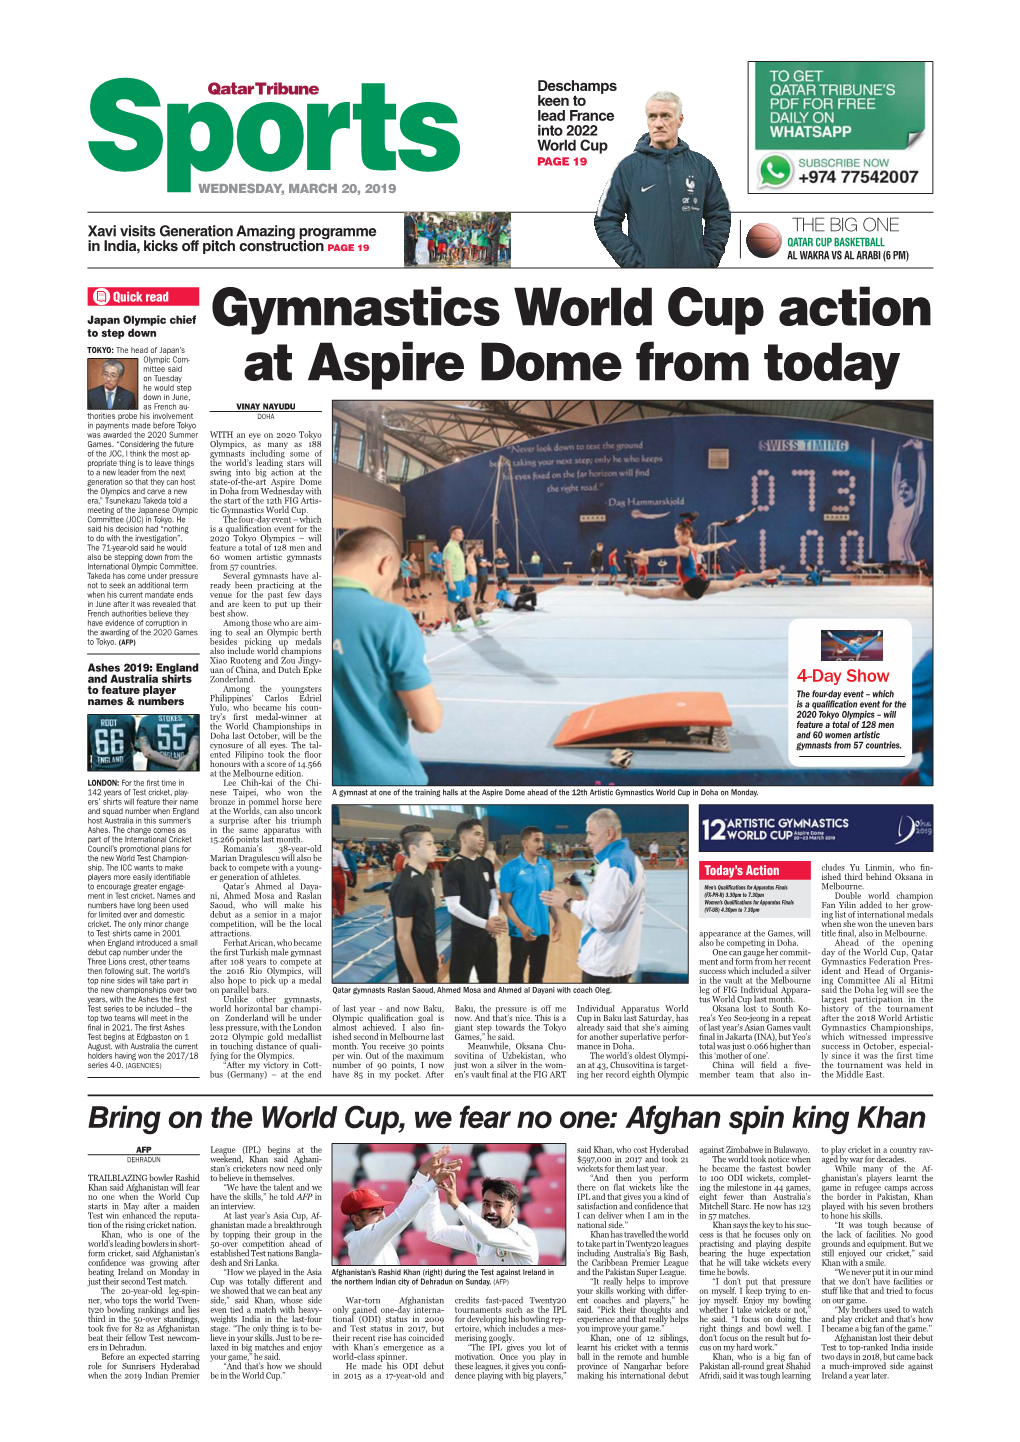 Gymnastics World Cup Action at Aspire Dome from Today